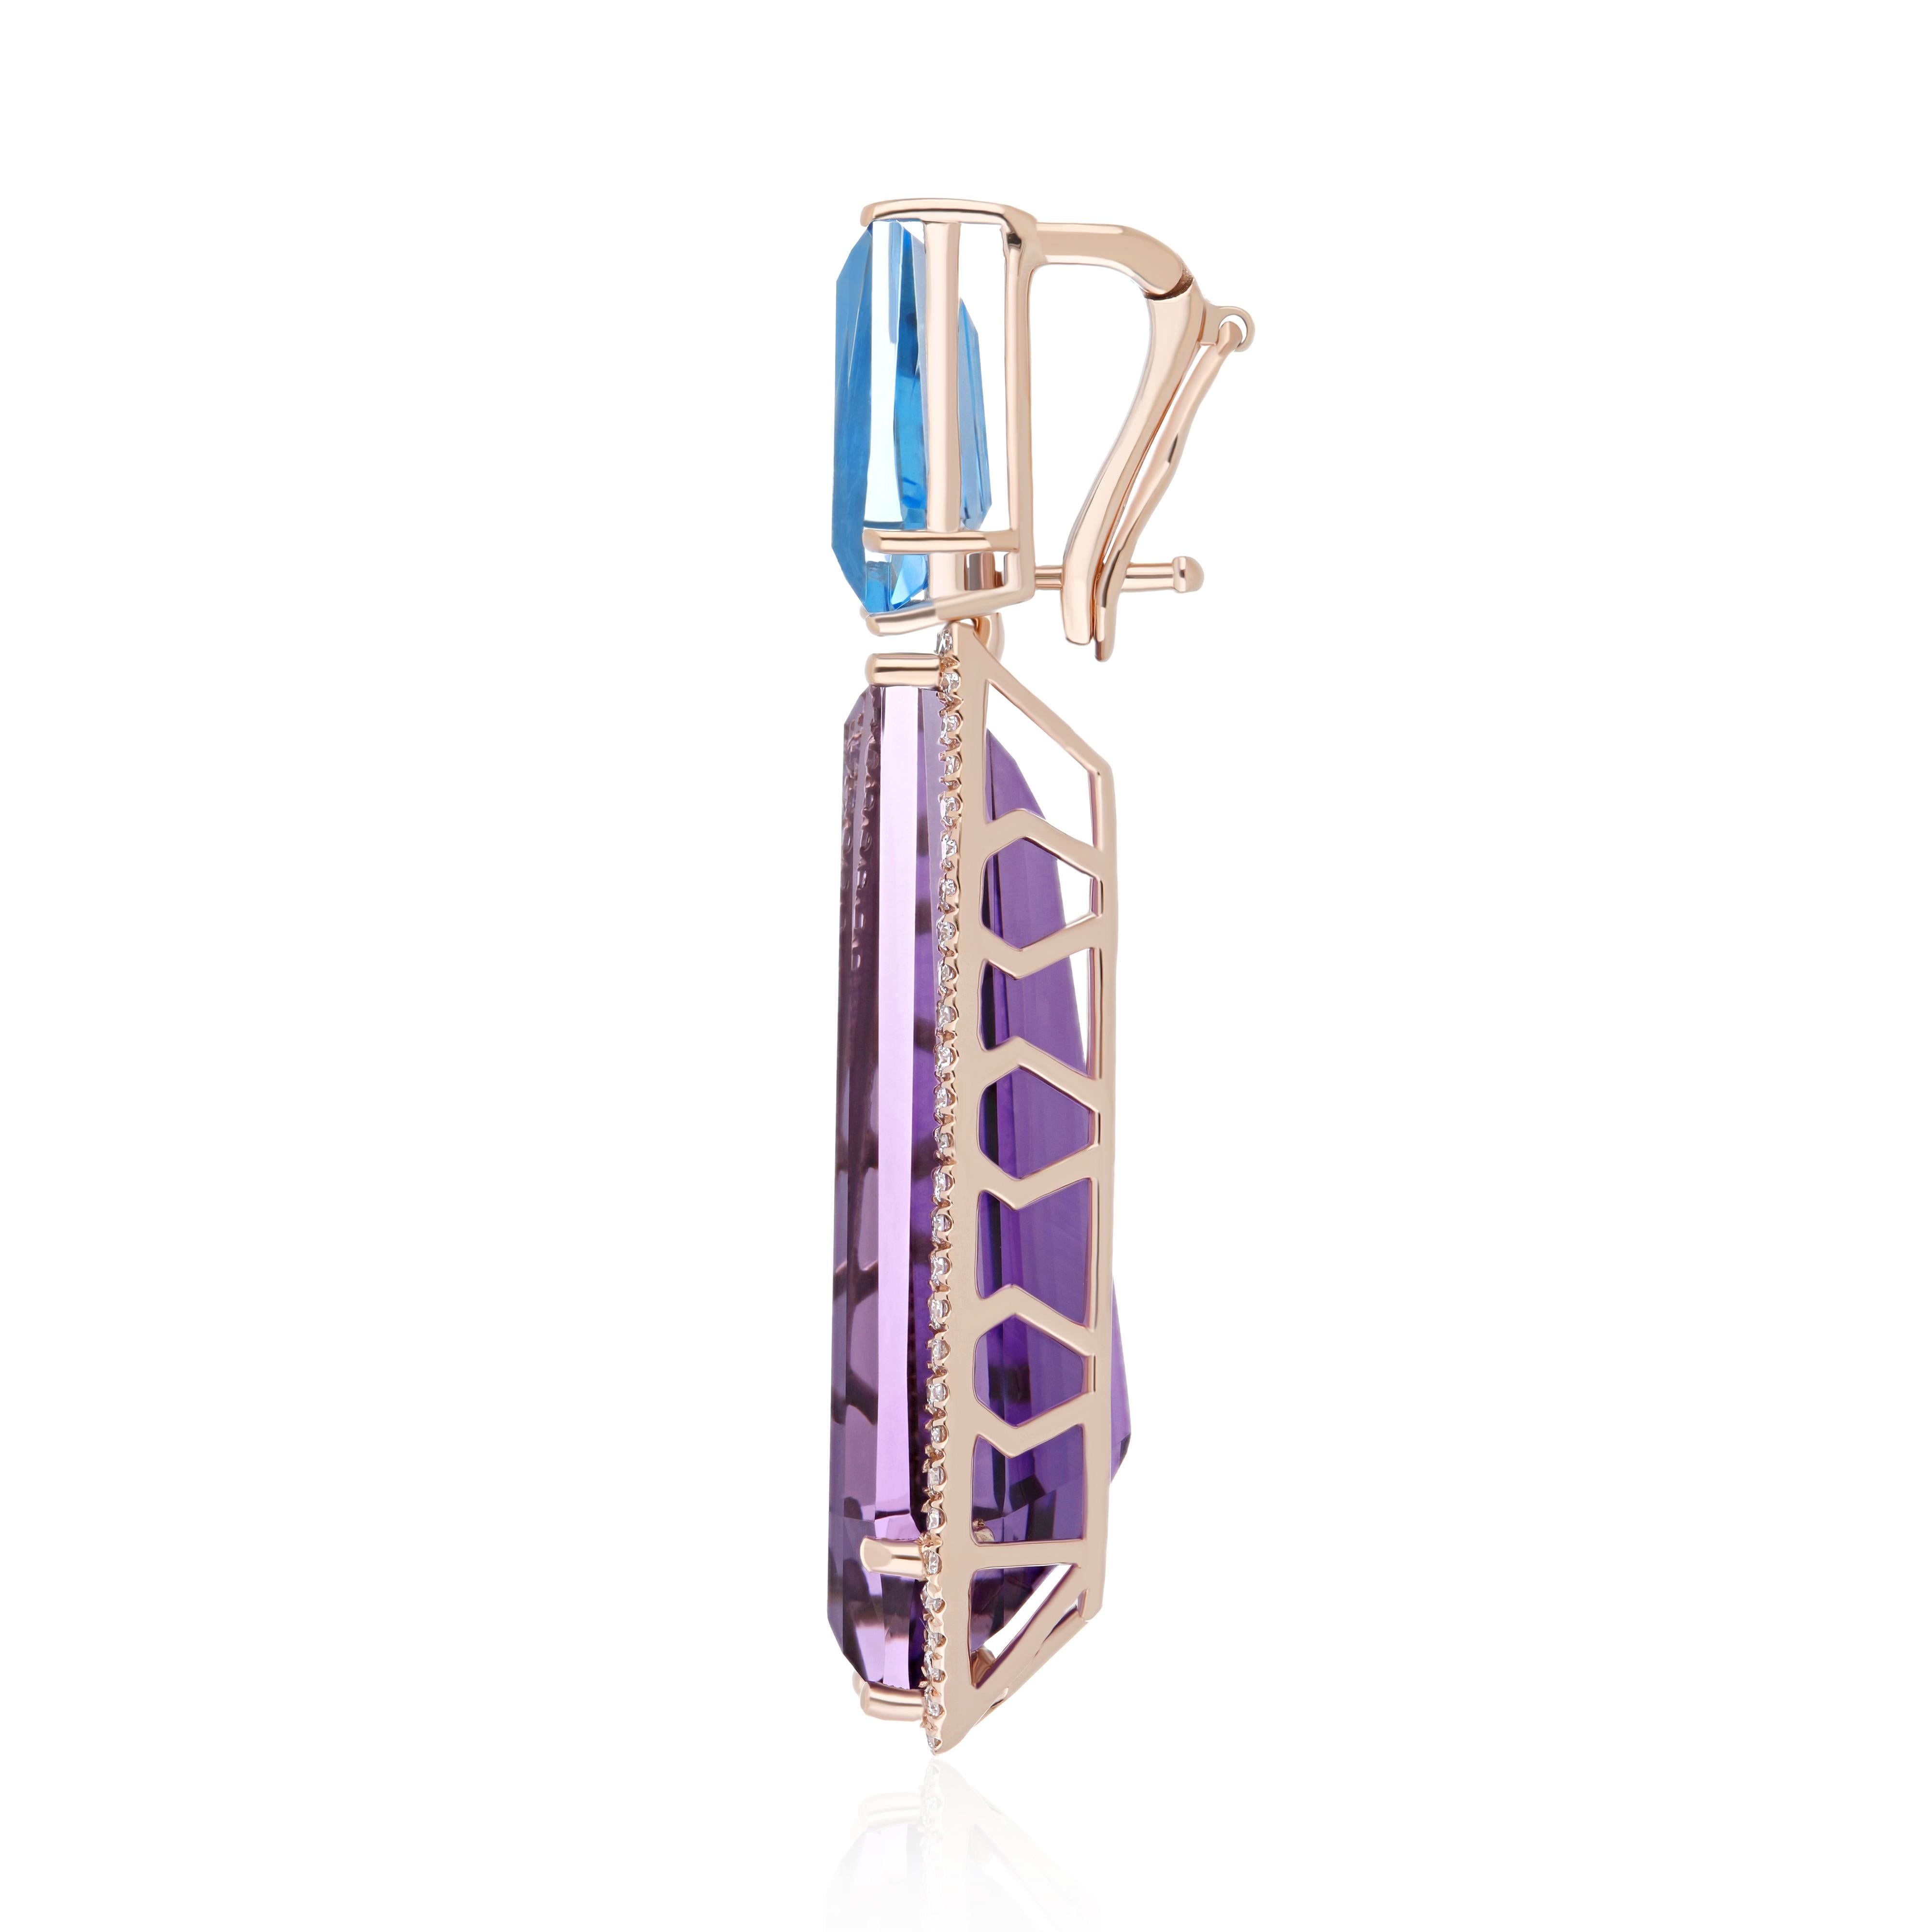 Elegant and exquisitely detailed Cocktail 14K Pendant, center set with 10.40Cts. (approx) Elongated Fancy Cut Amethyst , Swiss Blue Topaz With 2.02Cts(approx) In Fancy Shape . Its Also set in Prong setting. Surrounded with Diamonds, weighing approx.